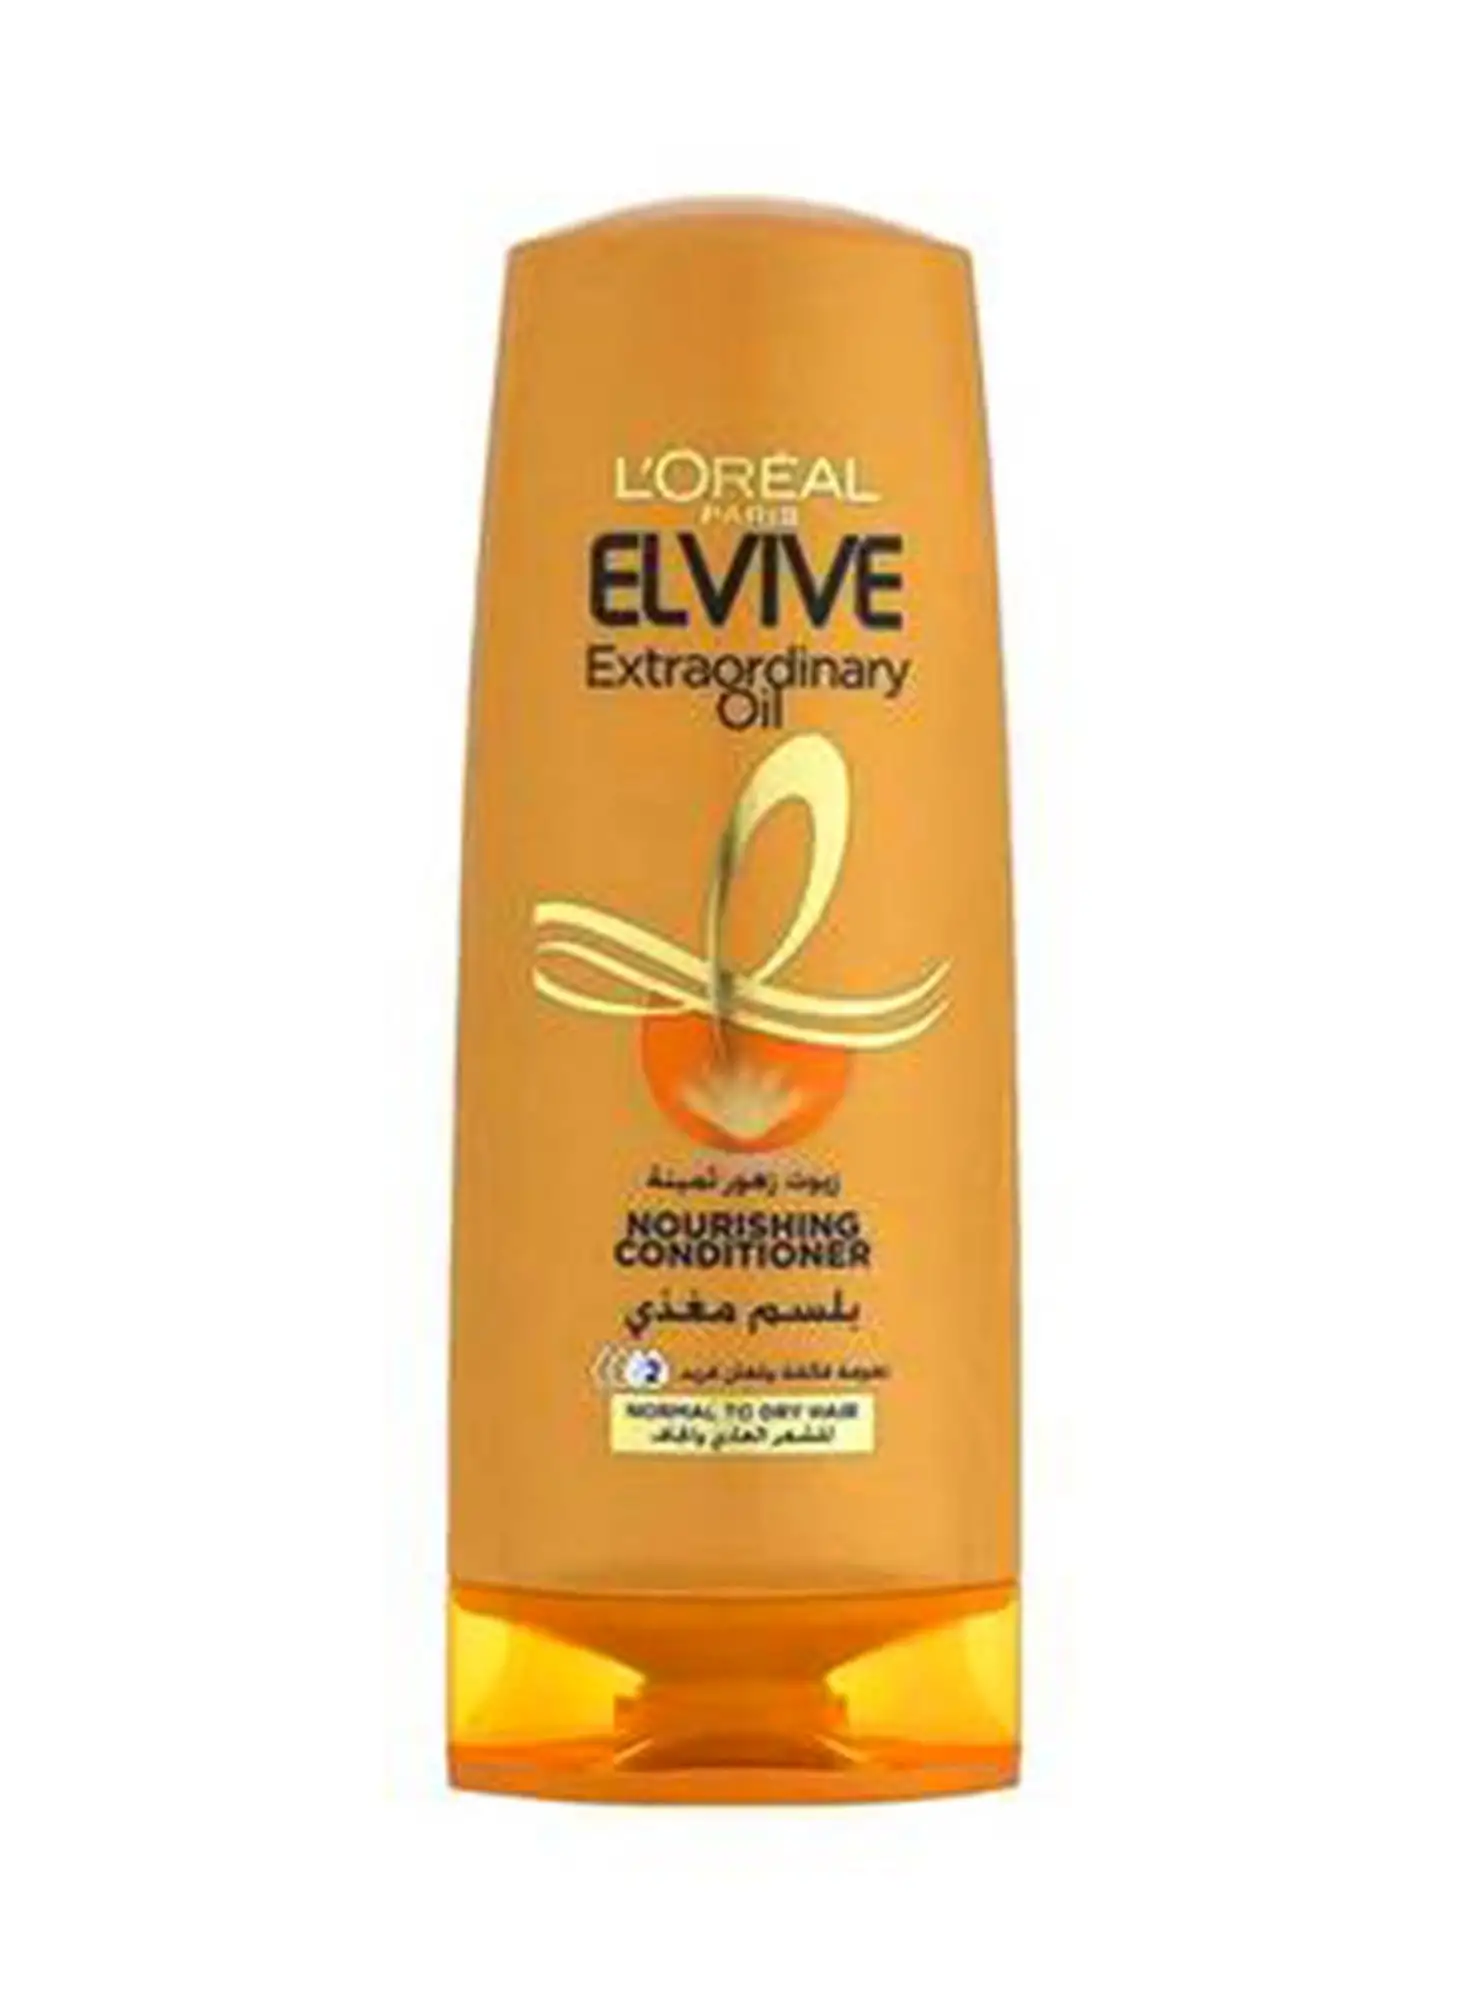 L'OREAL PARIS Elvive Extraordinary Oild Nourishing Conditioner Normal and Dry Hairs 360 ml